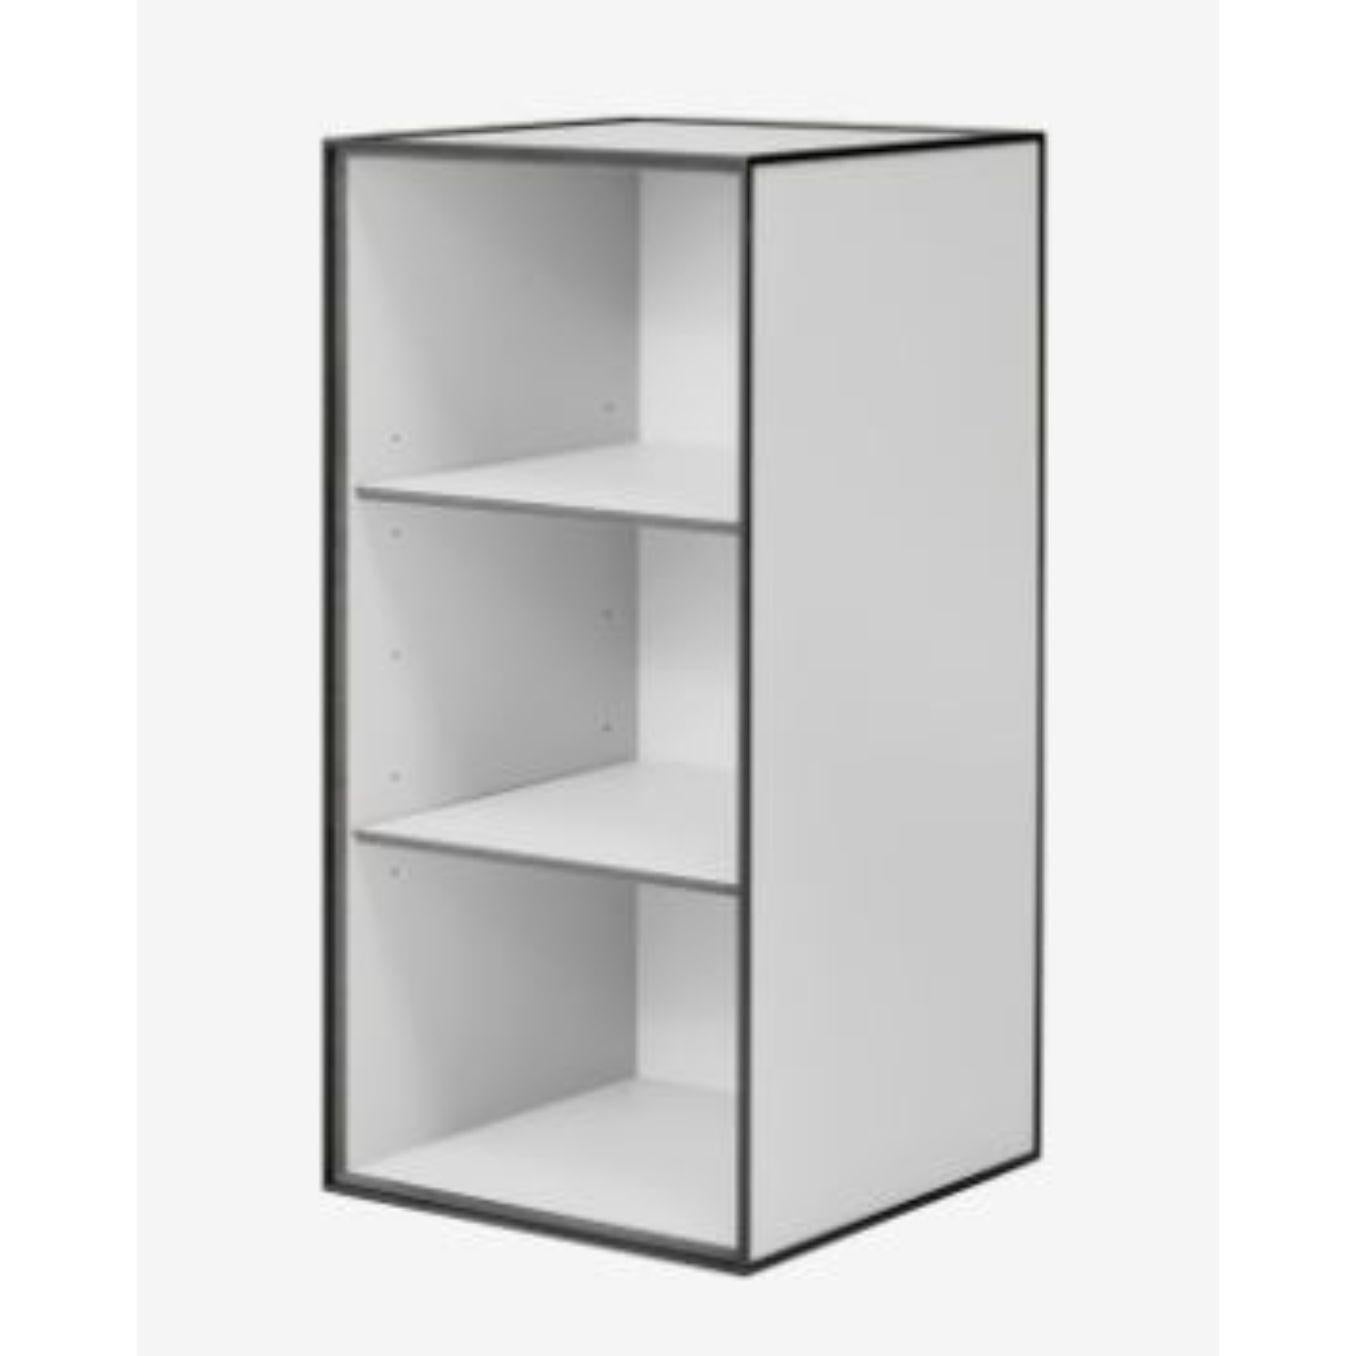 Other 70 Black Ash Frame Box with 2 Shelves by Lassen For Sale